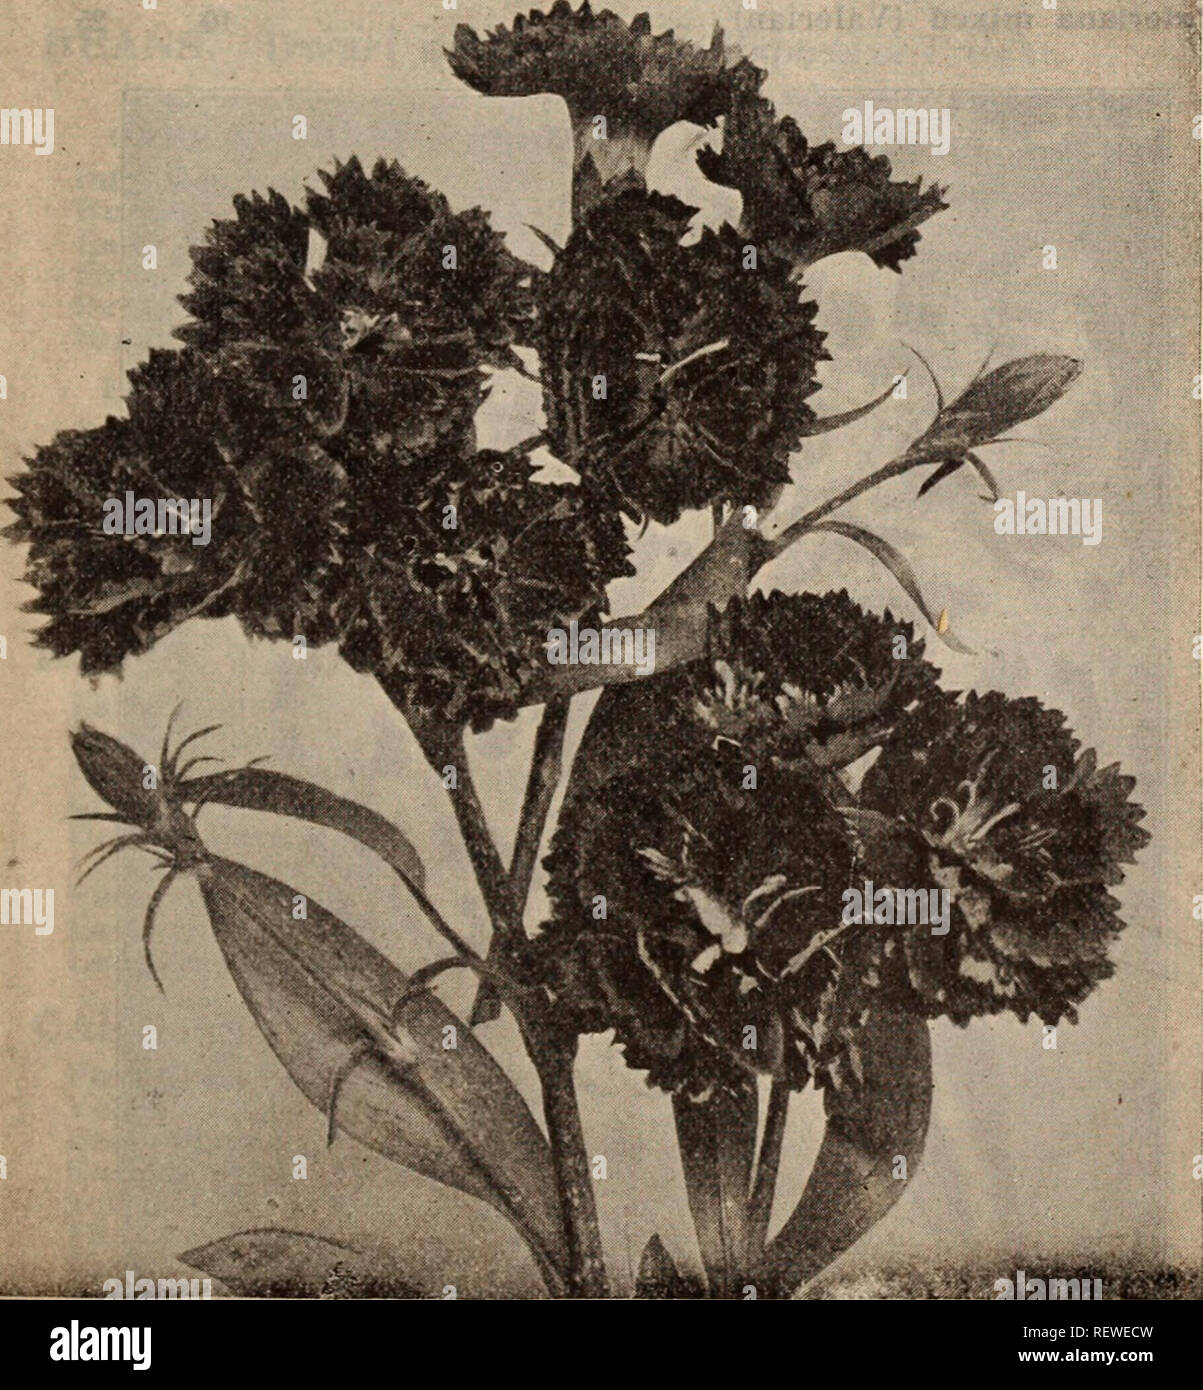 . Dreer's wholesale price list / Henry A. Dreer.. Nursery Catalogue. HENRY A. DREER, PHILADELPHIA, PA., WHOLESALE PRICE LIST 35 Saved from a fine lot of mixed 'Alaska. The finest of all the Tr. pkt. Oz. 10 $0 20 25 1 00 30 2 00 30 2 00 15 40 20 75 30 1 50 40 2 00 10 50 3 00 20 75 Cassia Marilandlca Centaurea Montana. Blue Alba. White Cerastium Tomentosum (Snow in Summer) .... Chrysanthemum Maximum &quot;Triumph&quot; King Edward VII. The finest of the Moonpenny daisies Shasta Daisy. seedlings . . Shasta Daisy, ' Shasta Daisies Coreopsis Lanceolata Qrandiflora. An extra fine strain of this usef Stock Photo